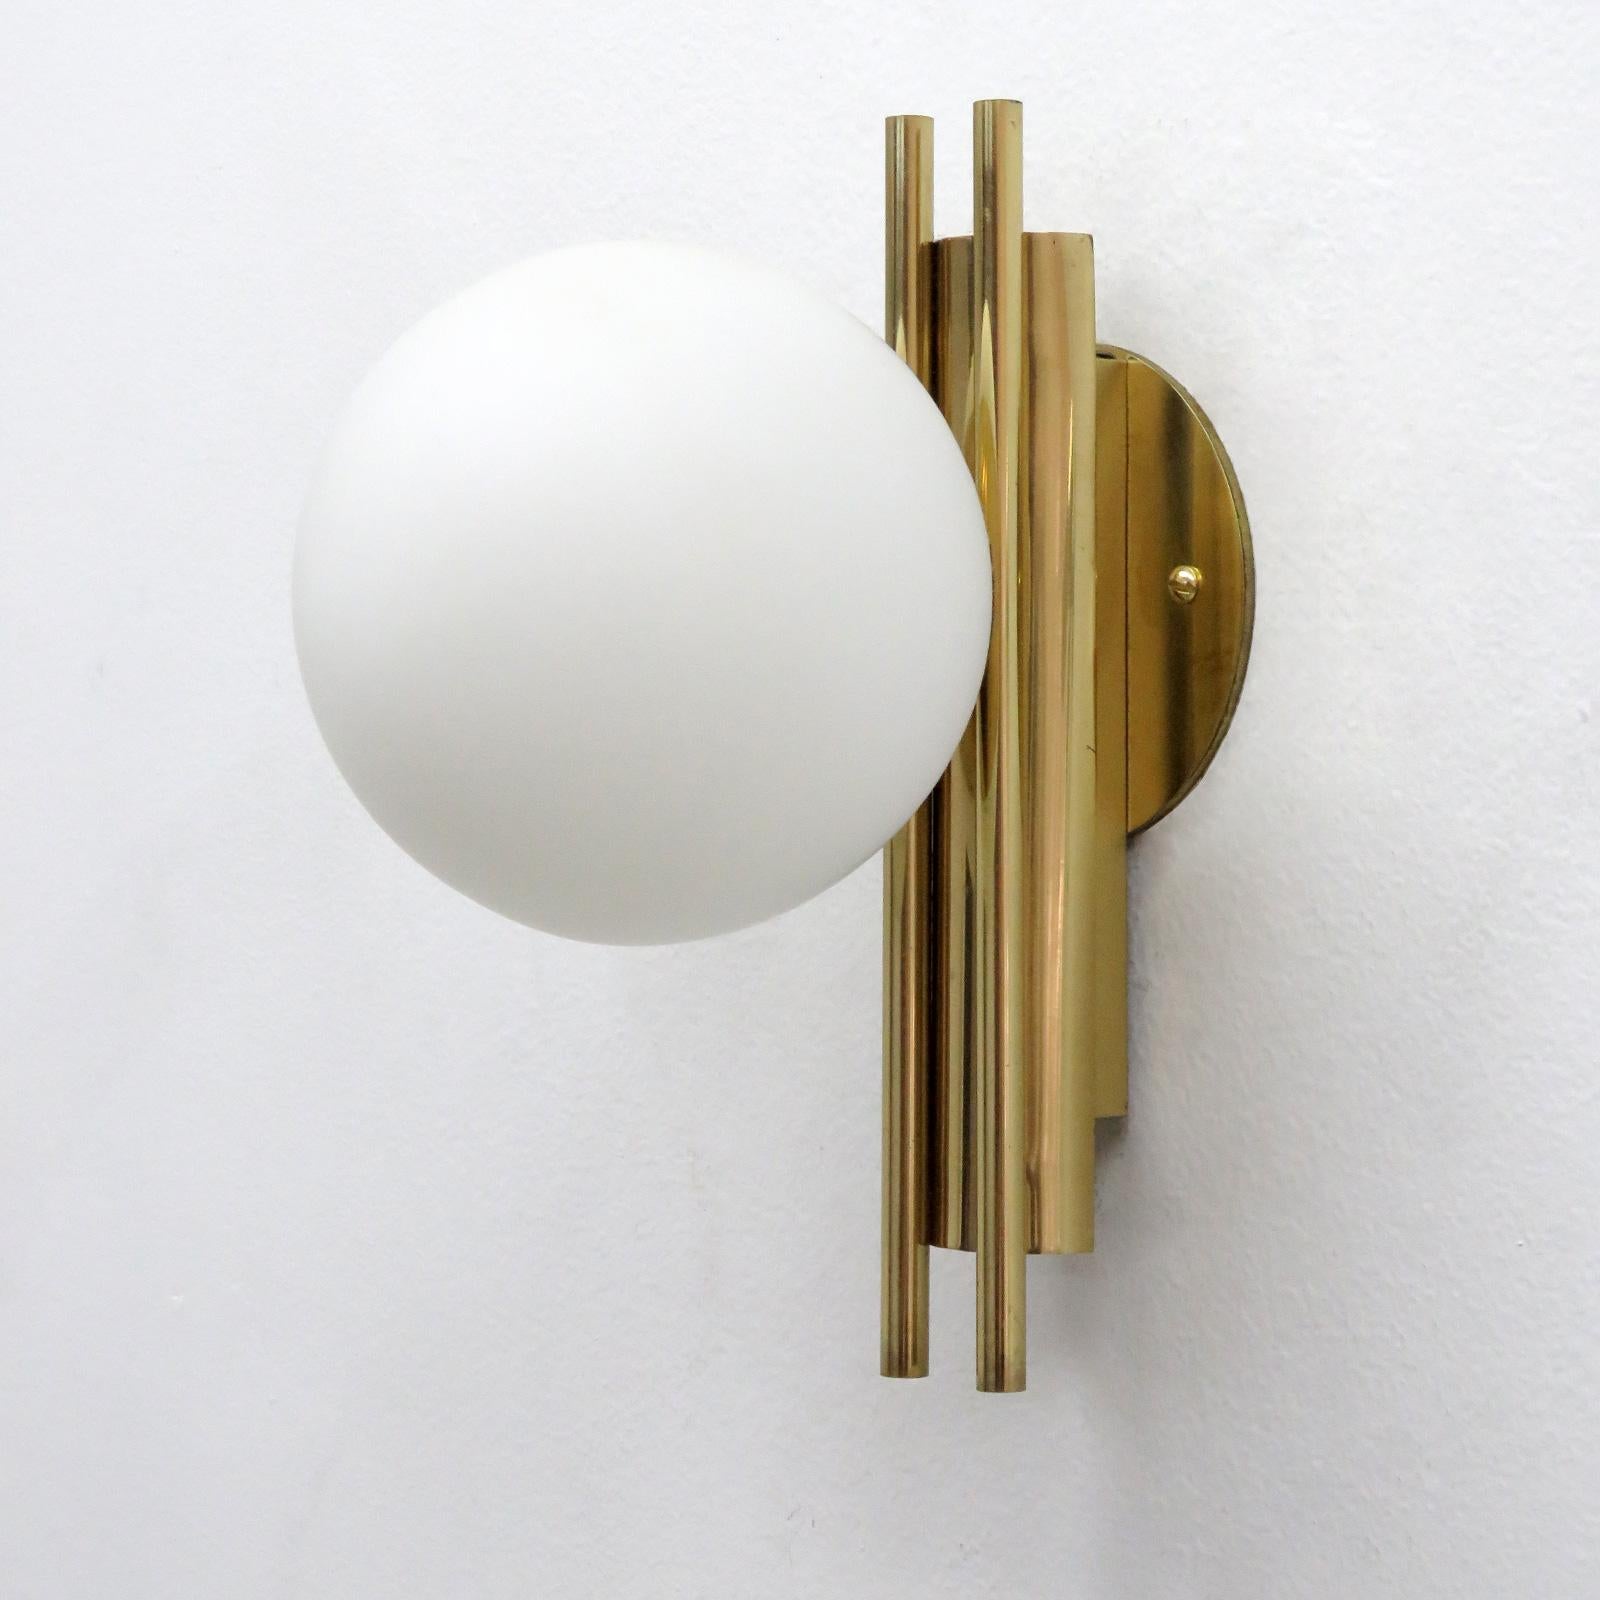 Wonderful pair of Italian wall lights in the manner of Stilnovo, in brass with matte opaline glass globes, custom solid brass back plates to cover standard US junction boxes.